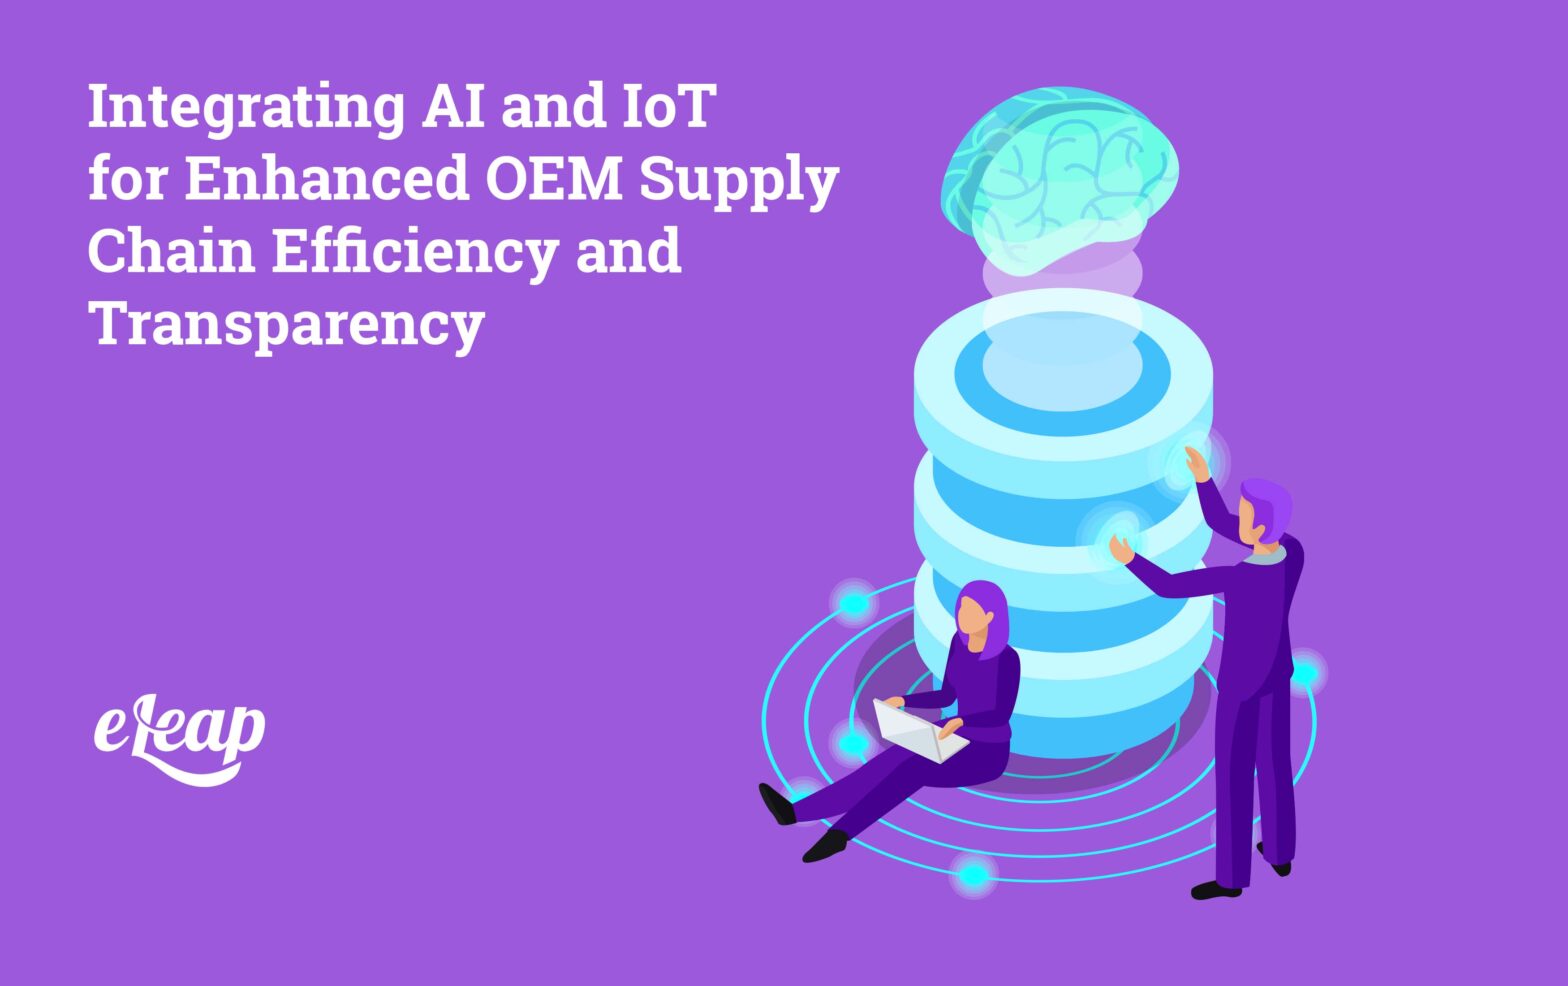 Integrating AI and IoT for Enhanced OEM Supply Chain Efficiency and Transparency